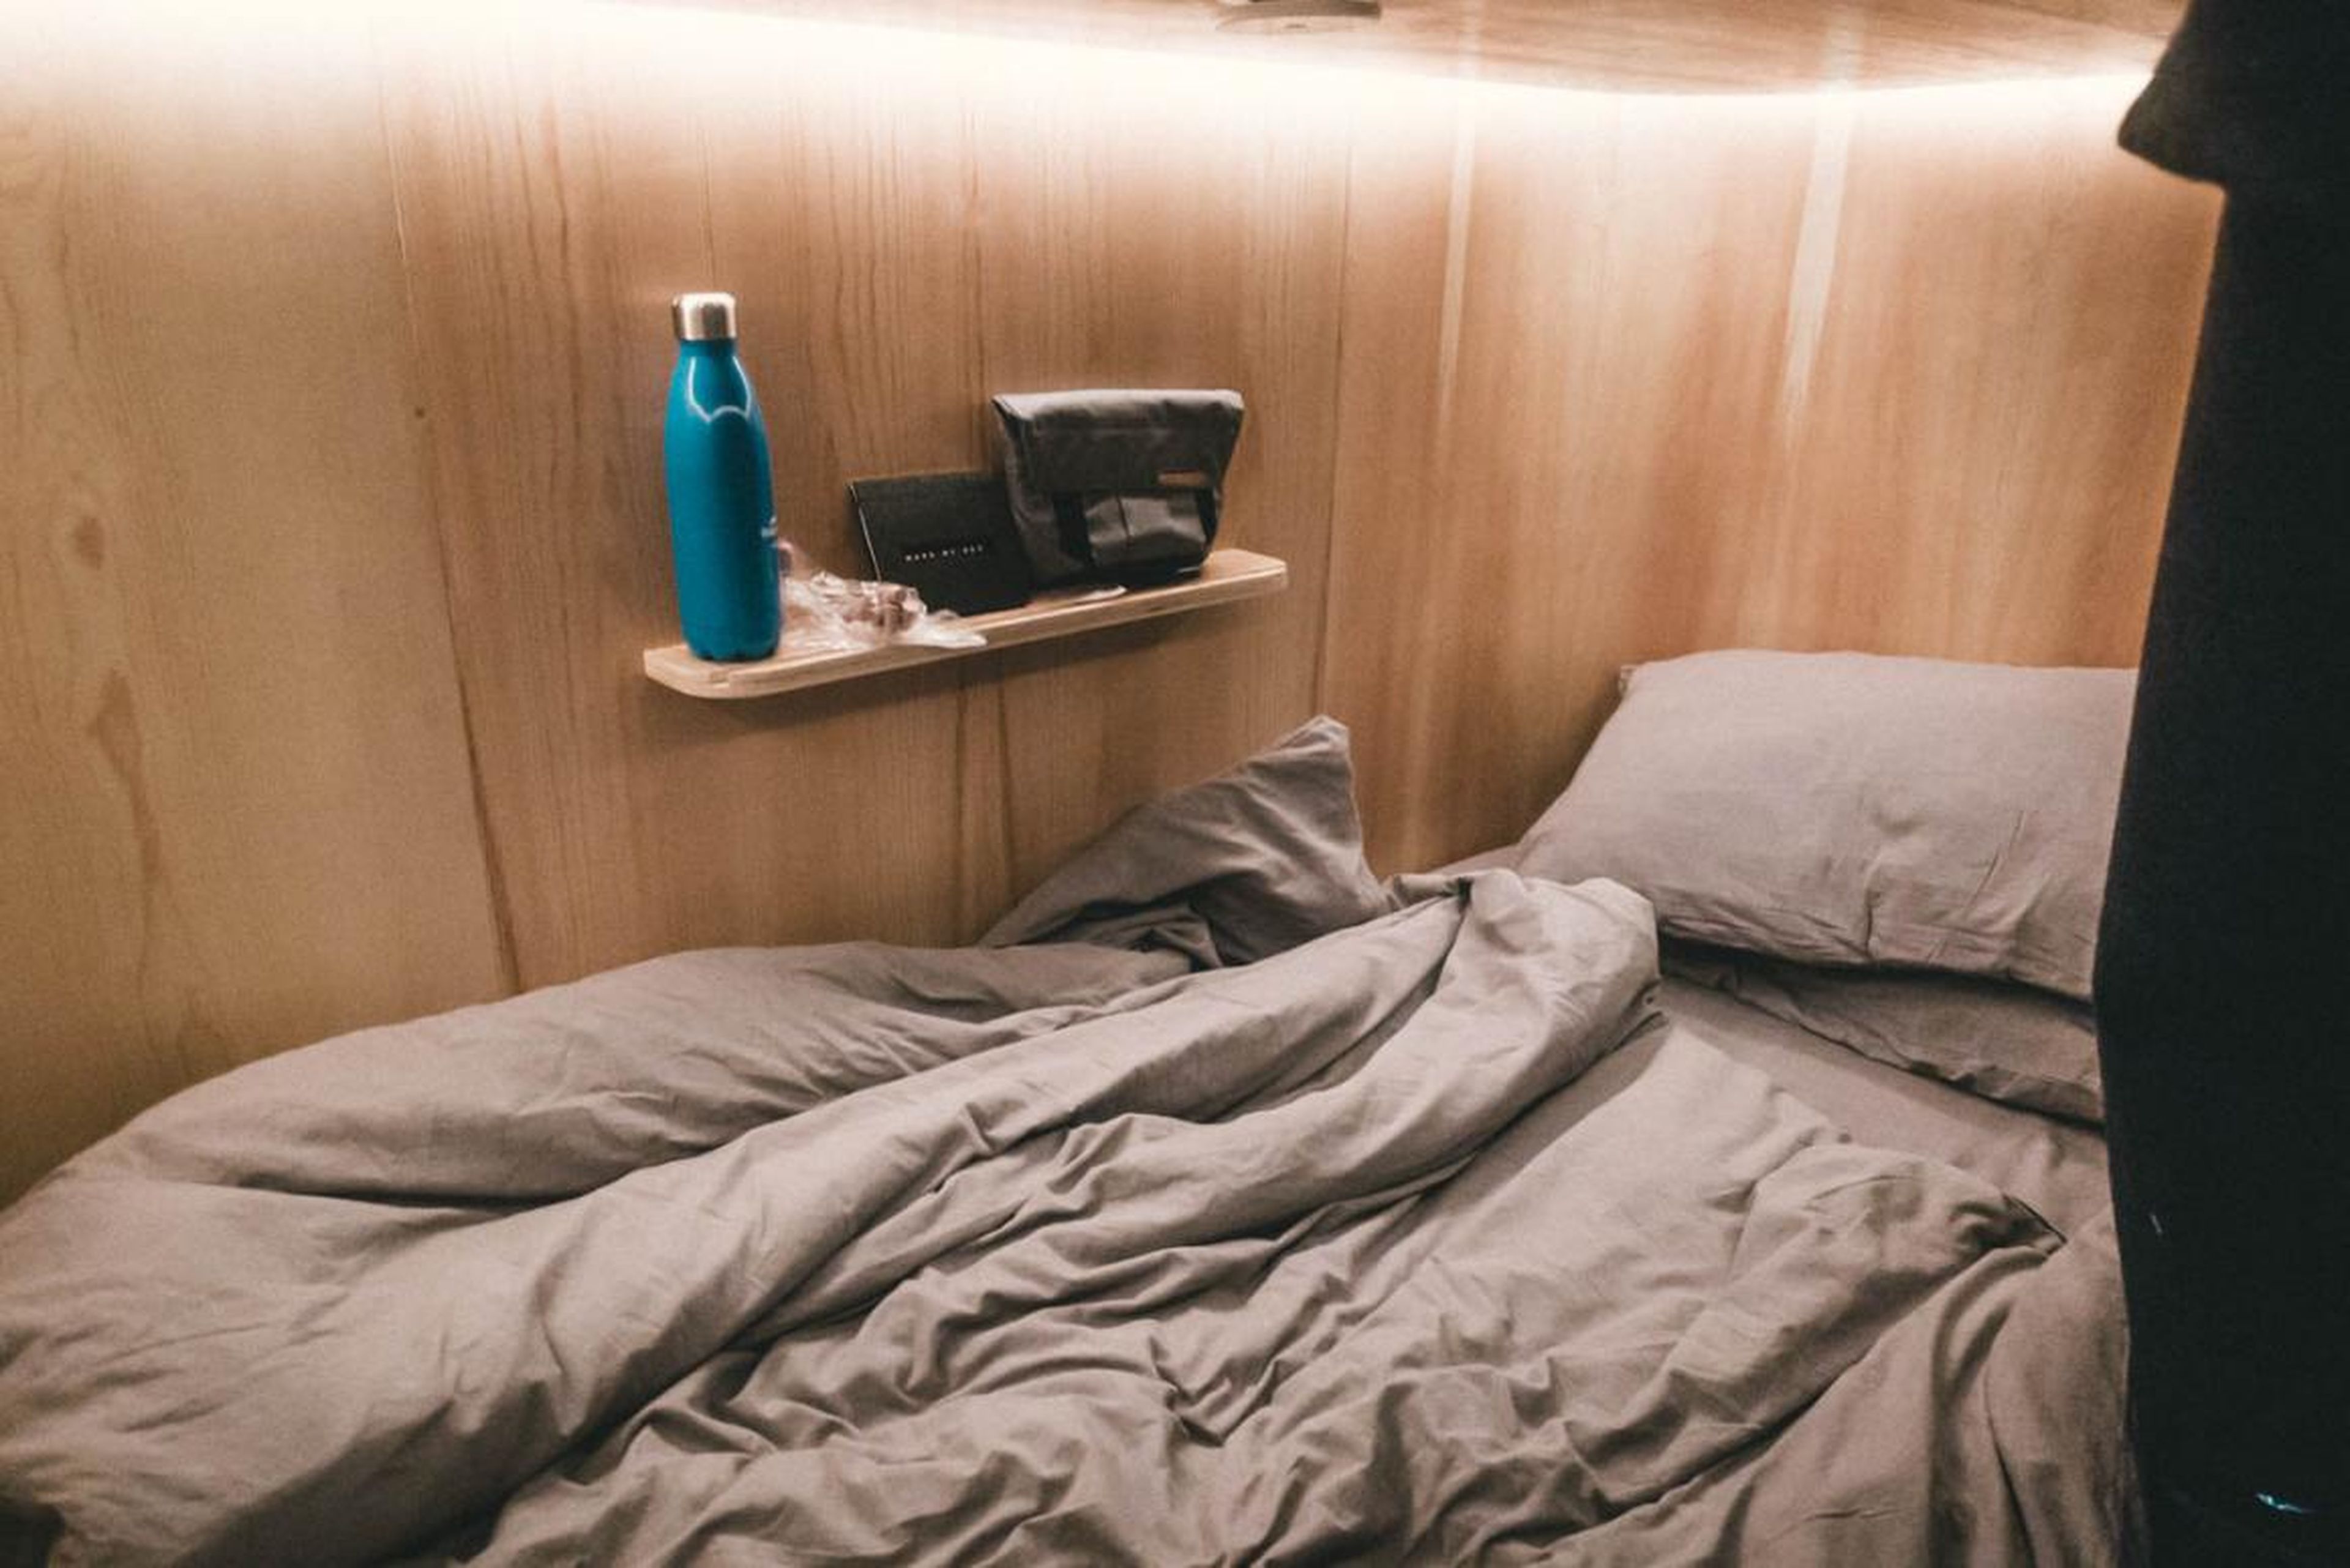 ... the pods got very hot, very quickly, and did little to block out sound. SLEEEP was supposed to be completely designed around getting you the best night of sleep. Instead, I woke up every time someone went to the bathroom or